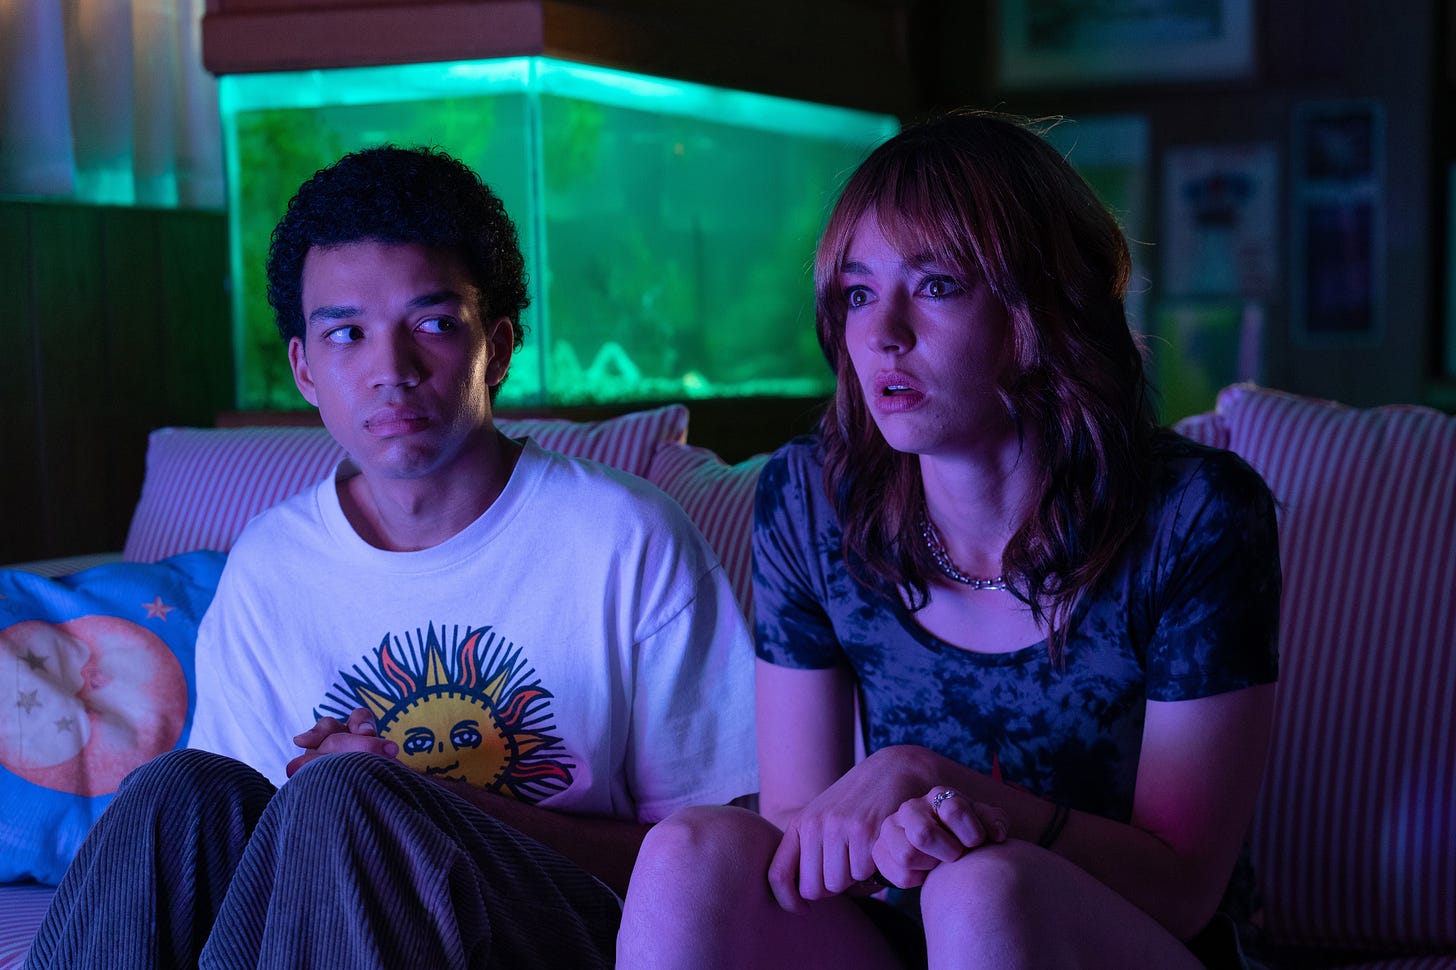 i saw the tv glow Justice Smith, Brigette Lundy-Paine